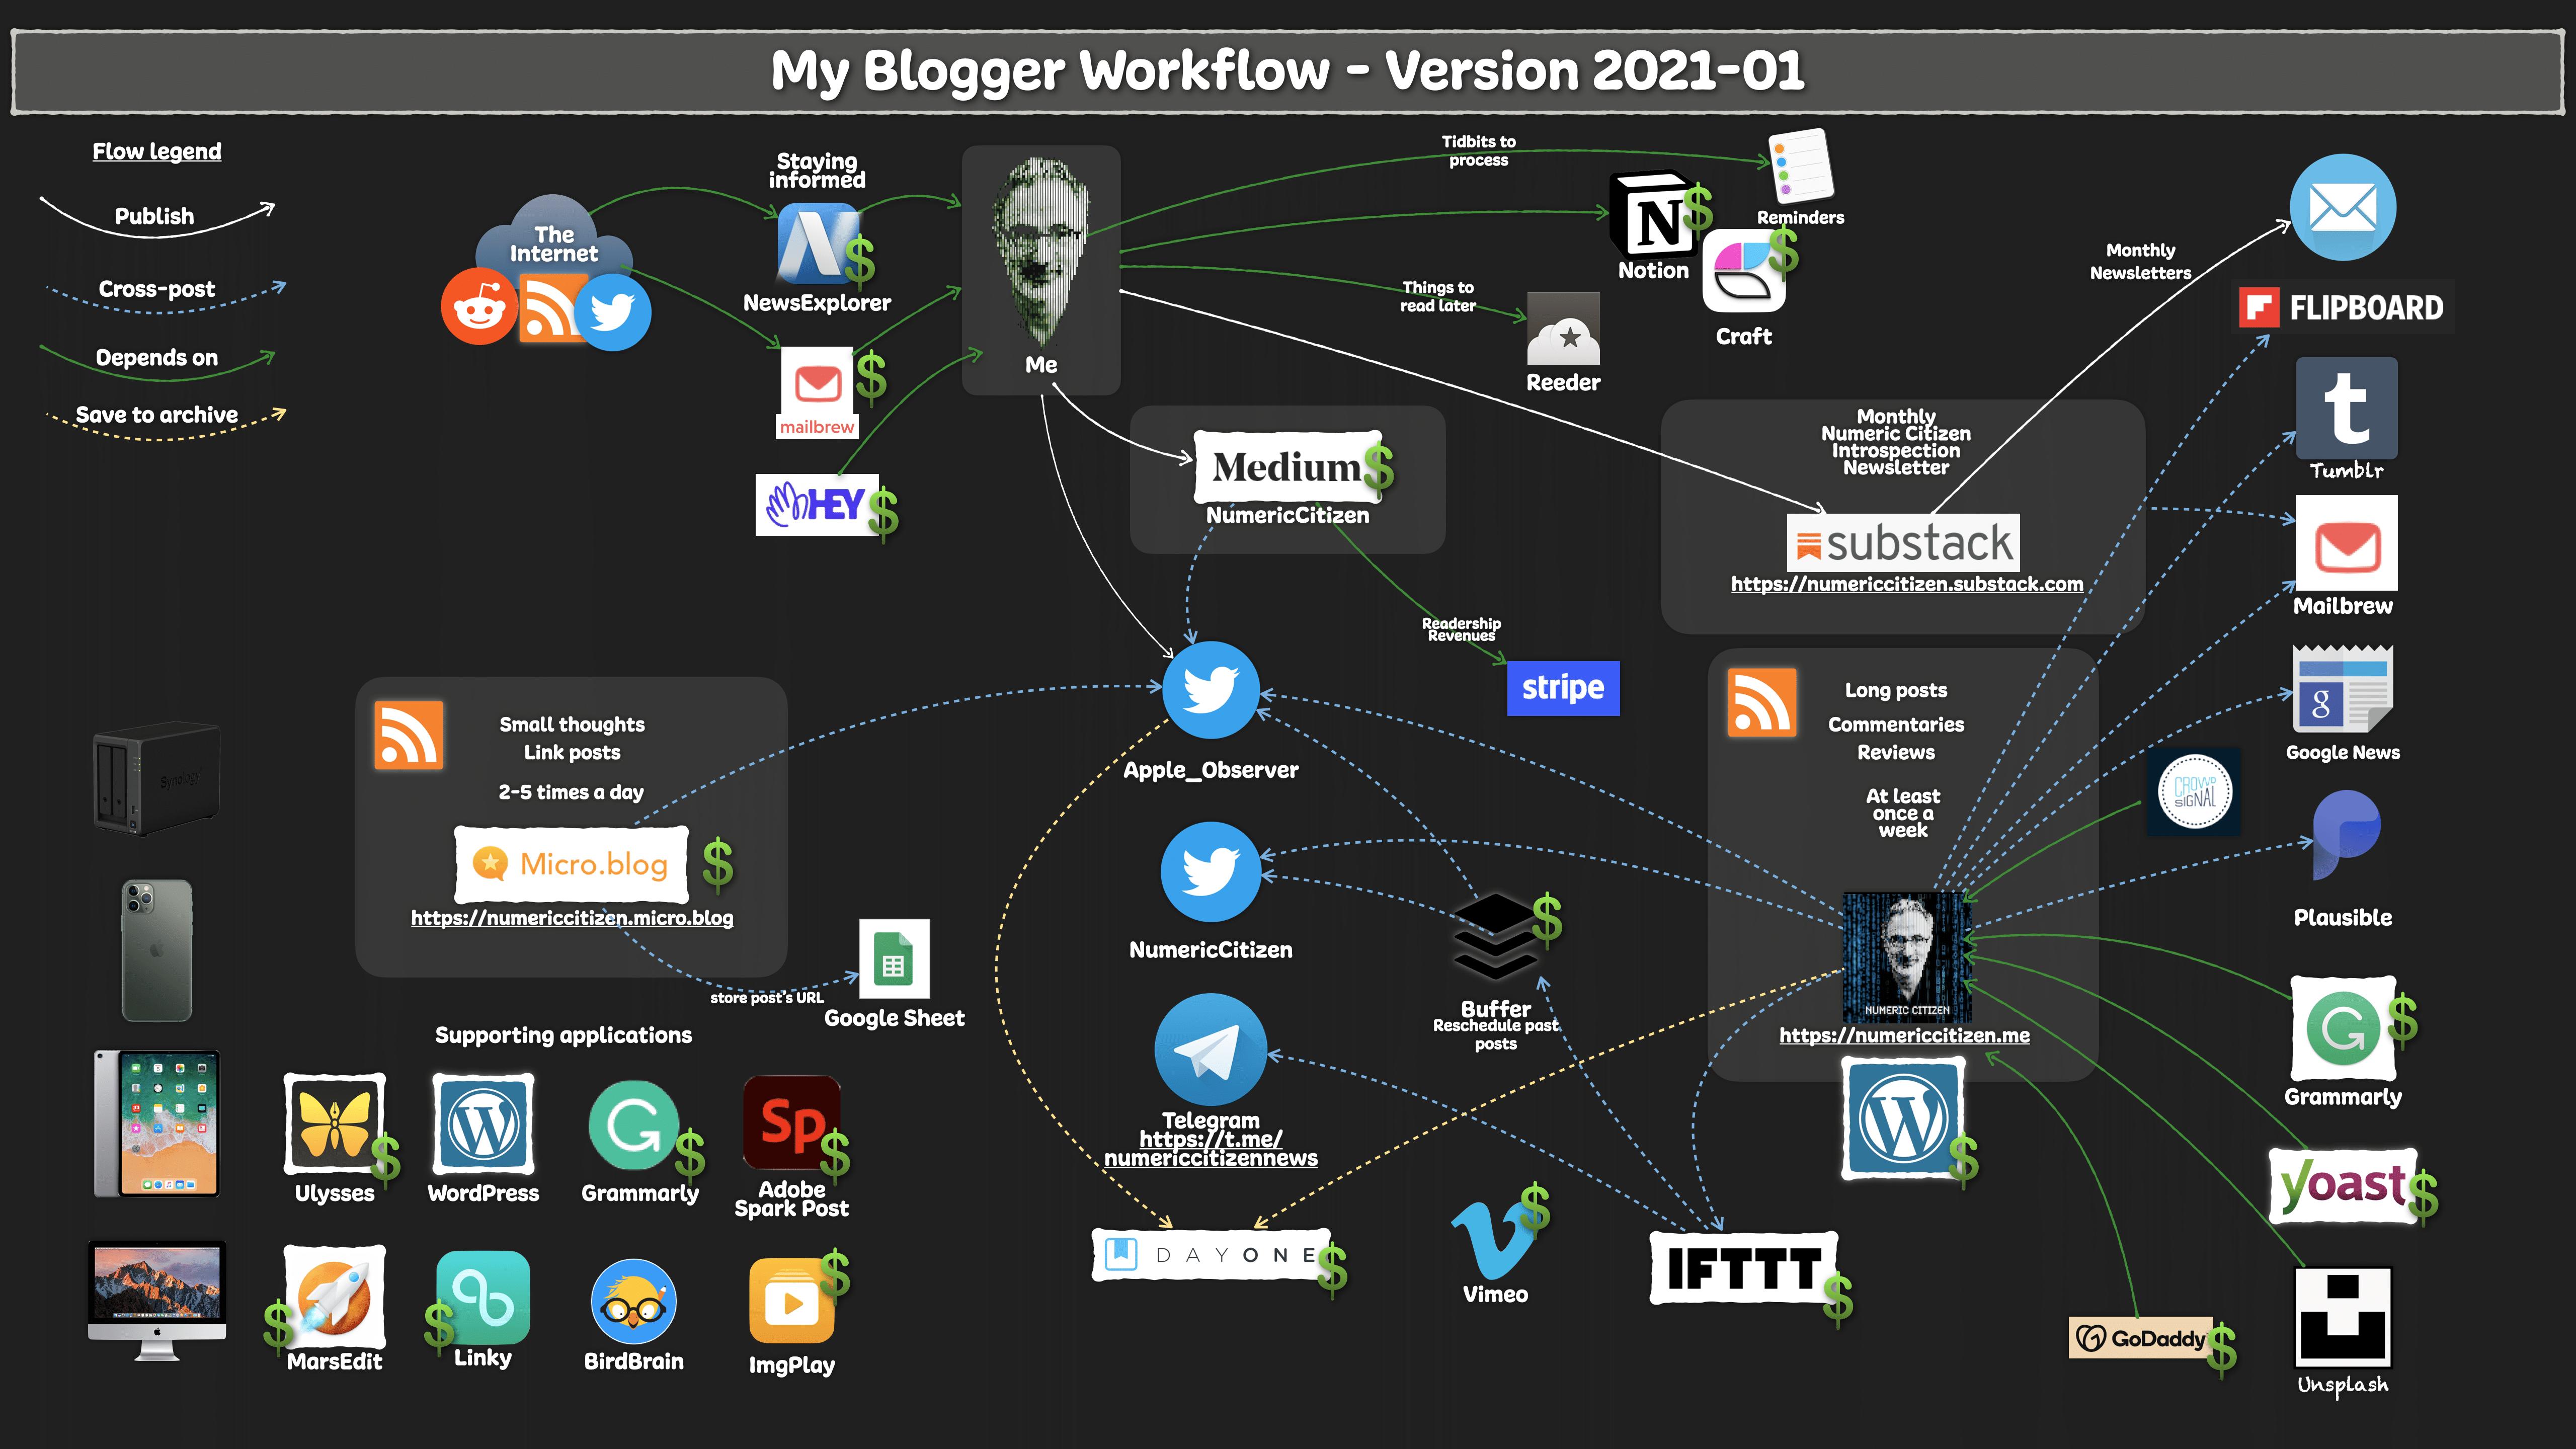 My Blogger Workflow as of 2021-01.